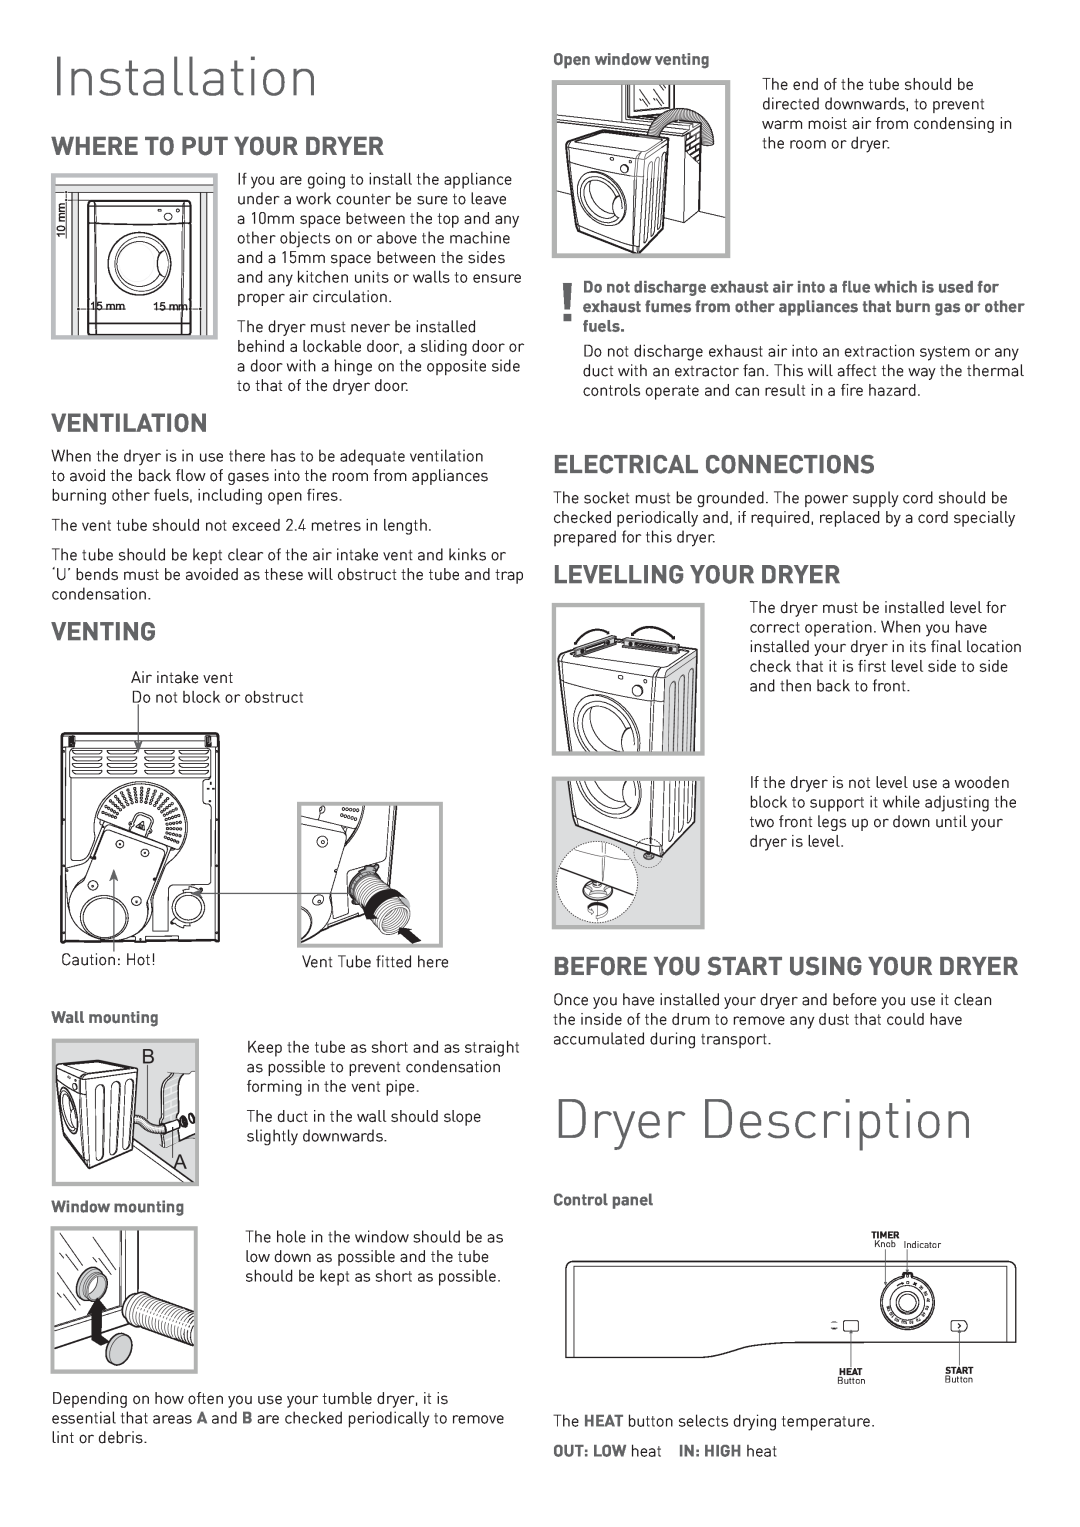 Hotpoint TVFM 70 Installation, Dryer Description, Where To Put Your Dryer, Ventilation, Venting, Electrical Connections 